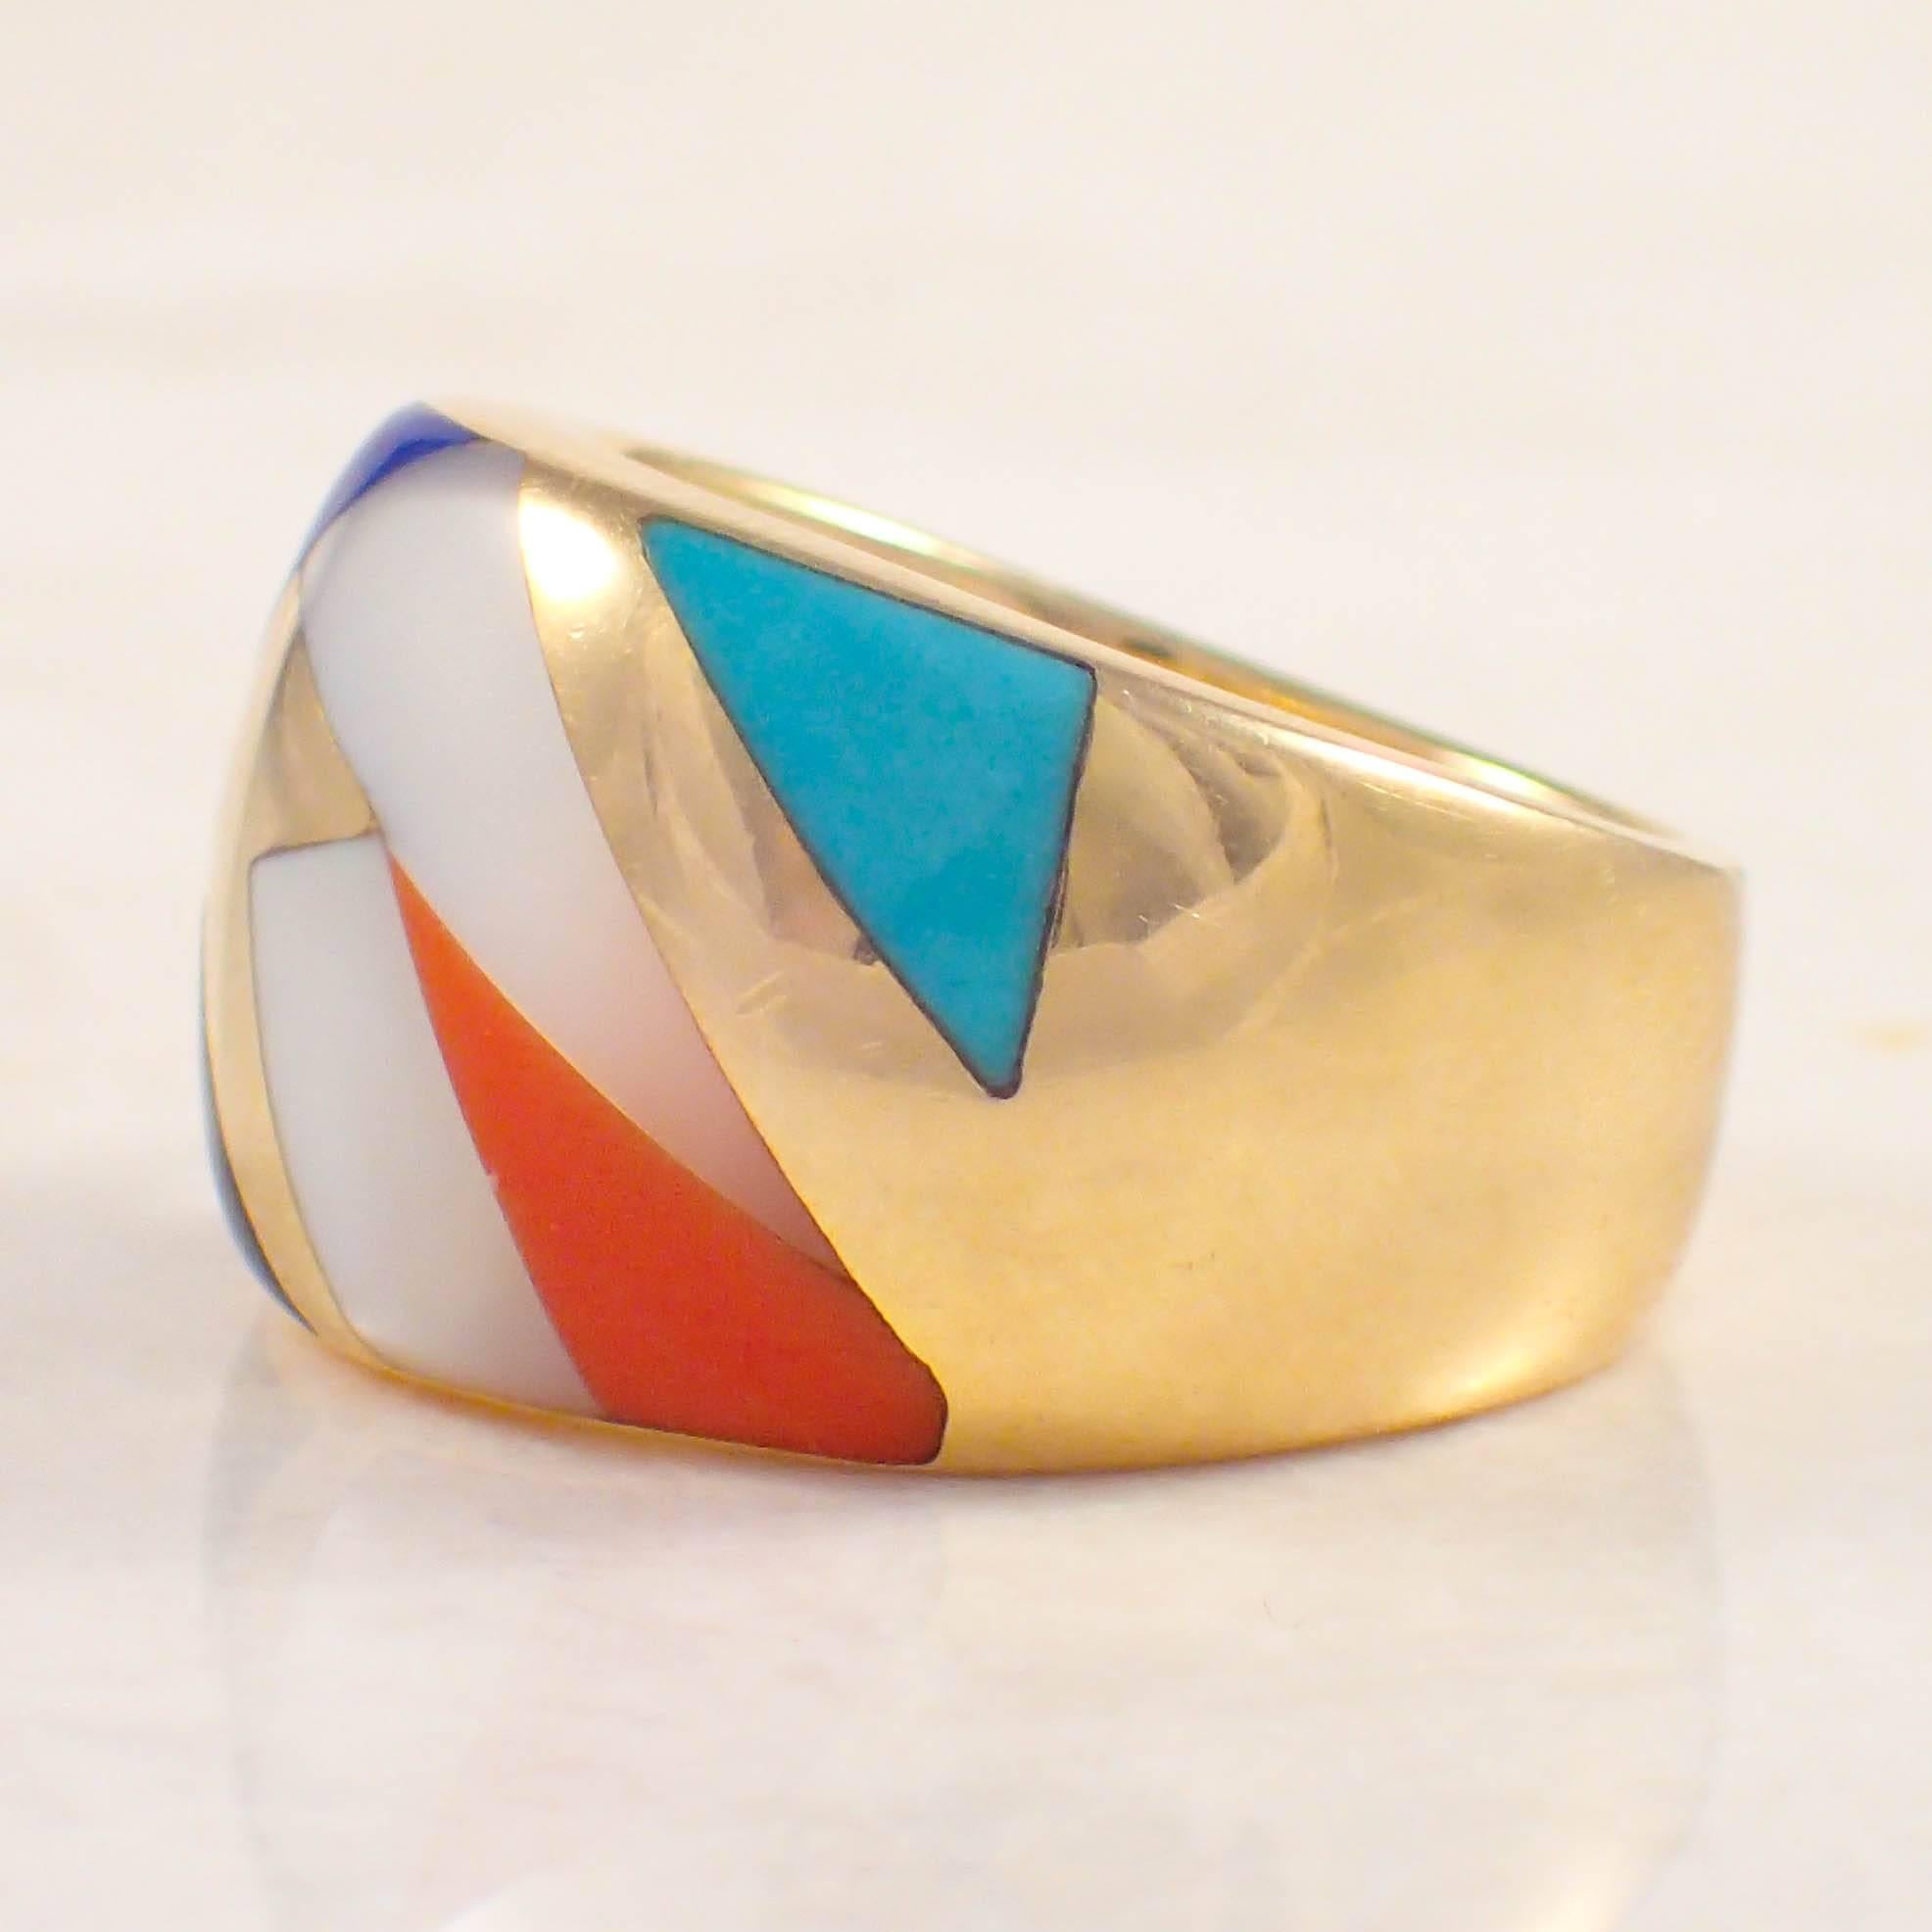 Asch Grossbardt Inlaid Gold Band Ring In Good Condition For Sale In Portland, ME